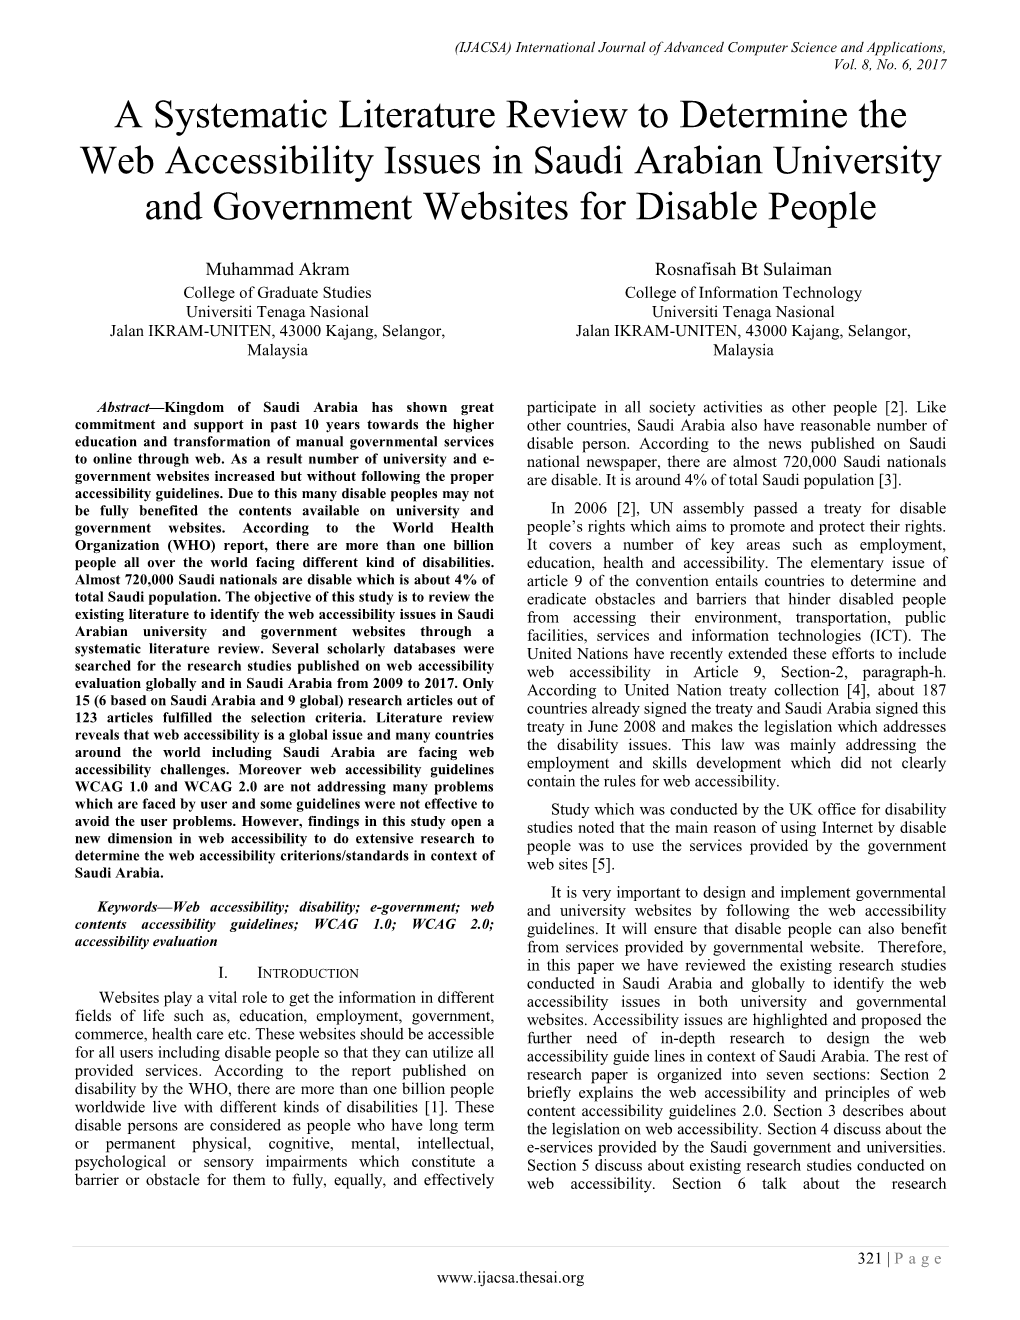 A Systematic Literature Review to Determine the Web Accessibility Issues in Saudi Arabian University and Government Websites for Disable People